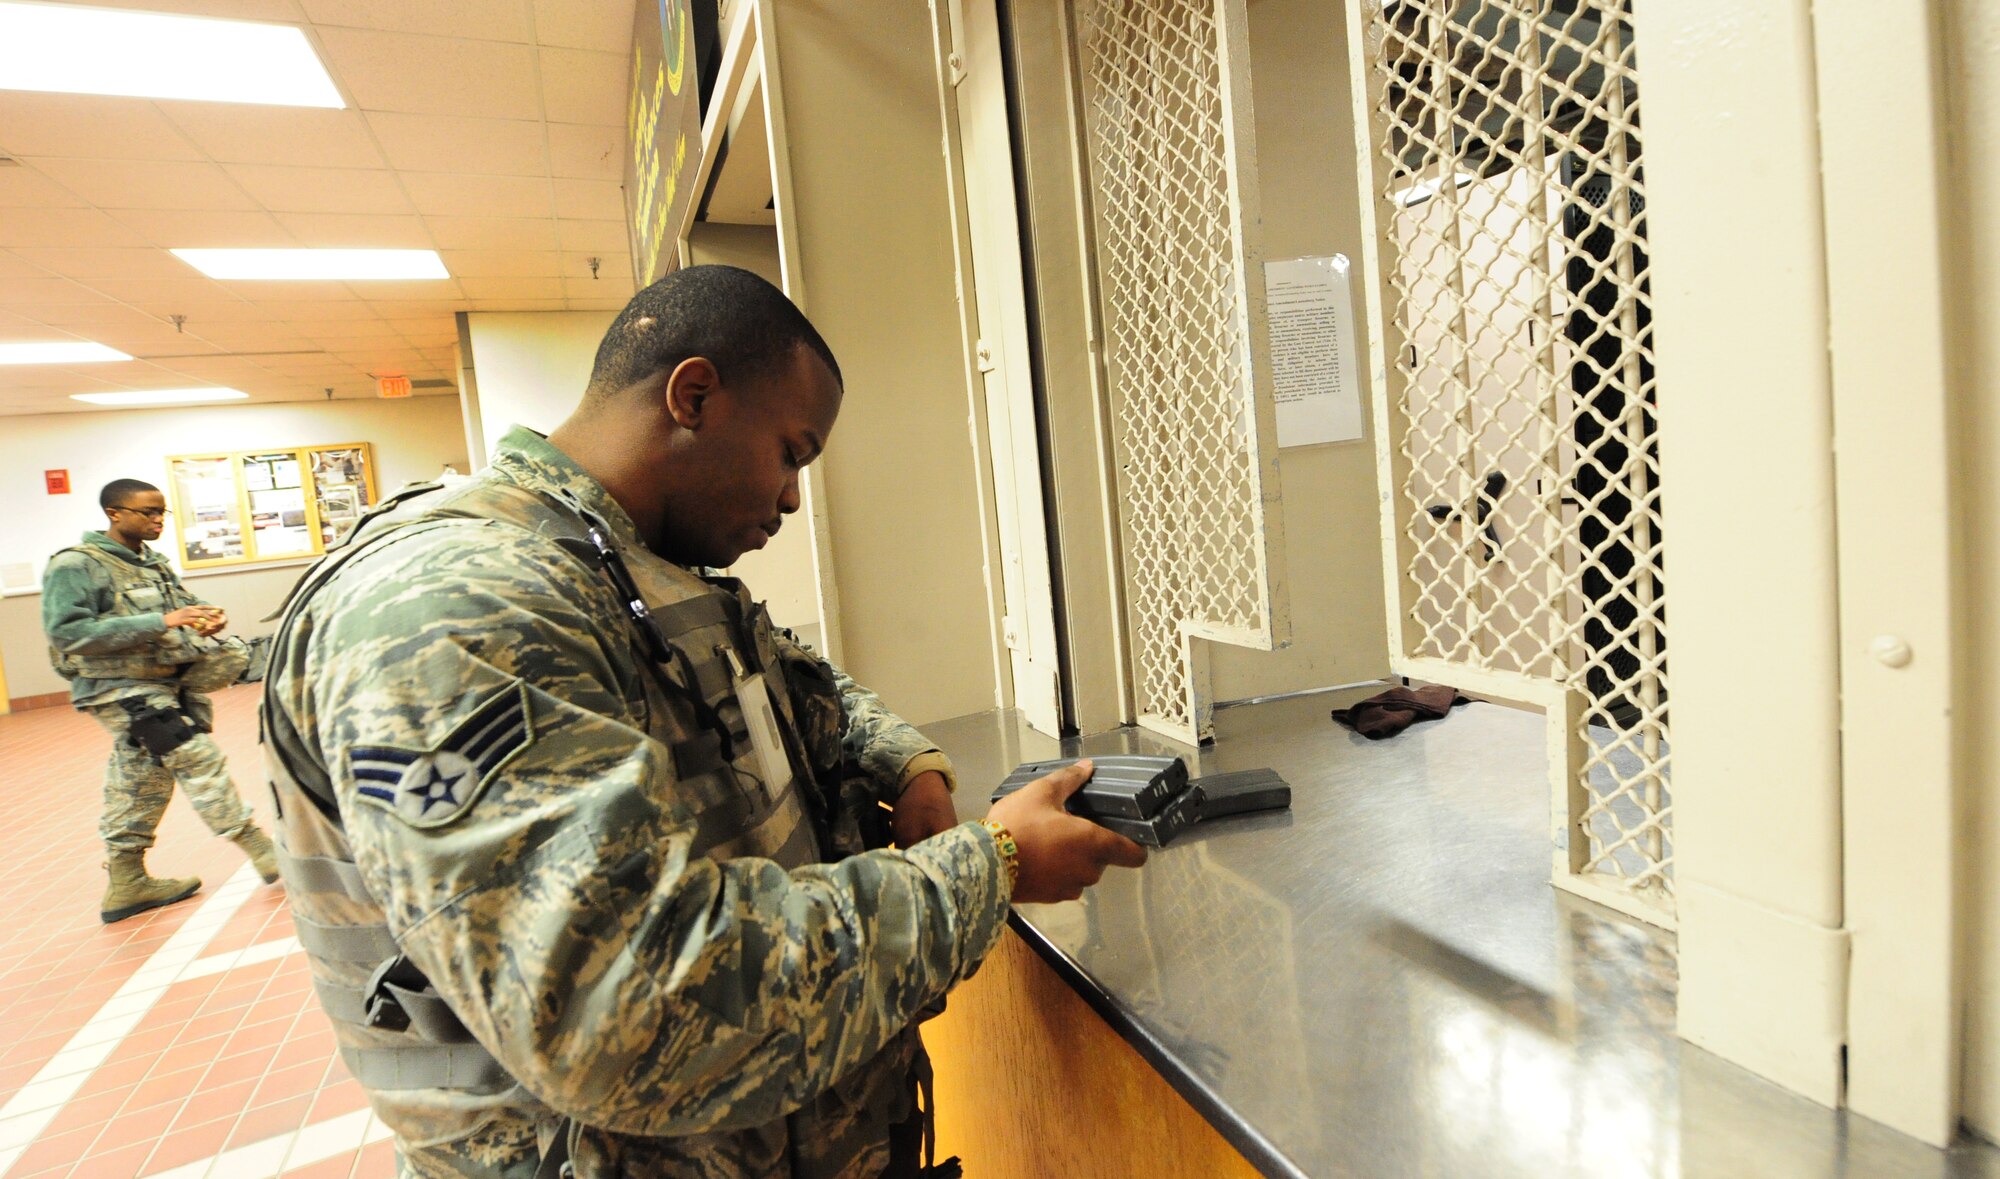 Senior Airman John Harris, 509th Security Forces Squadron response force member, stows away M4 carbine magazines just before reporting to his assigned post at Whiteman Air Force Base, Mo., March 25, 2013. Members working in the armory are accountable for every weapon and piece of ammunition issued to security forces Airmen. (U.S. Air Force photo by Staff Sgt. Nick Wilson/Released) 